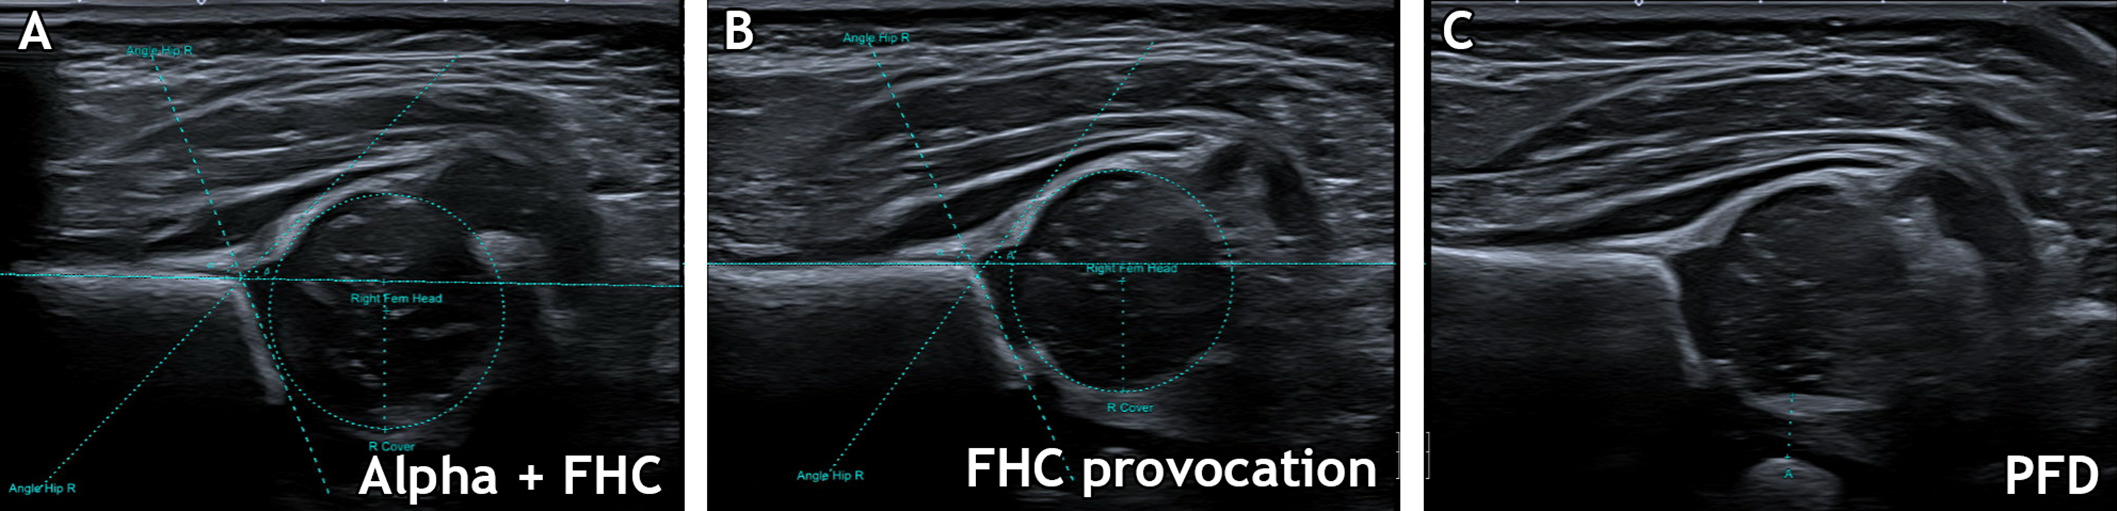 Fig. 1 
            Three ultrasound images of one paediatric hip examination. a) Graf standard plane with added annotated α angles and femoral head coverage (FHC) values. b) Ultrasound image captured during hip provocation with annotated FHC values. c) Ultrasound image captured during hip provocation with annotated pubofemoral distance (PFD) values.
          